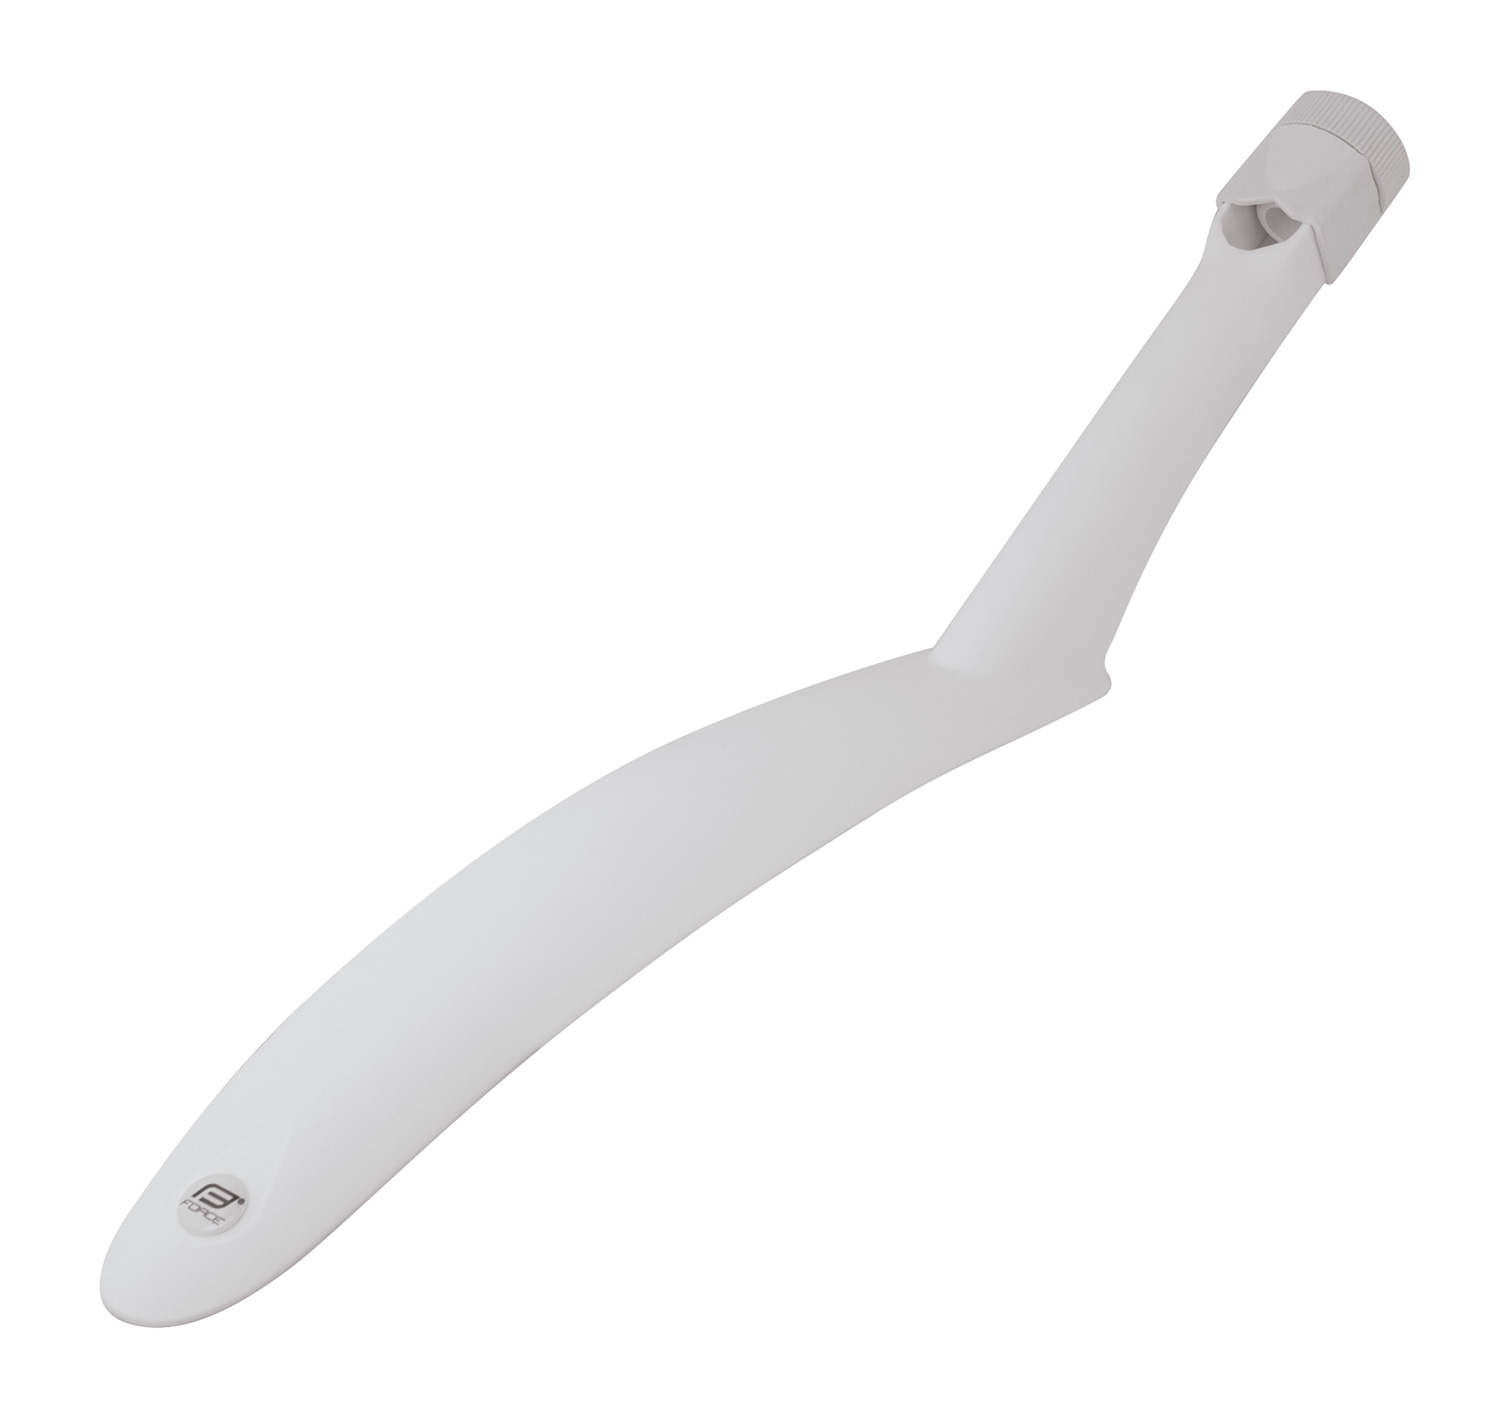 Force Mudguard  for seatpost mount, white